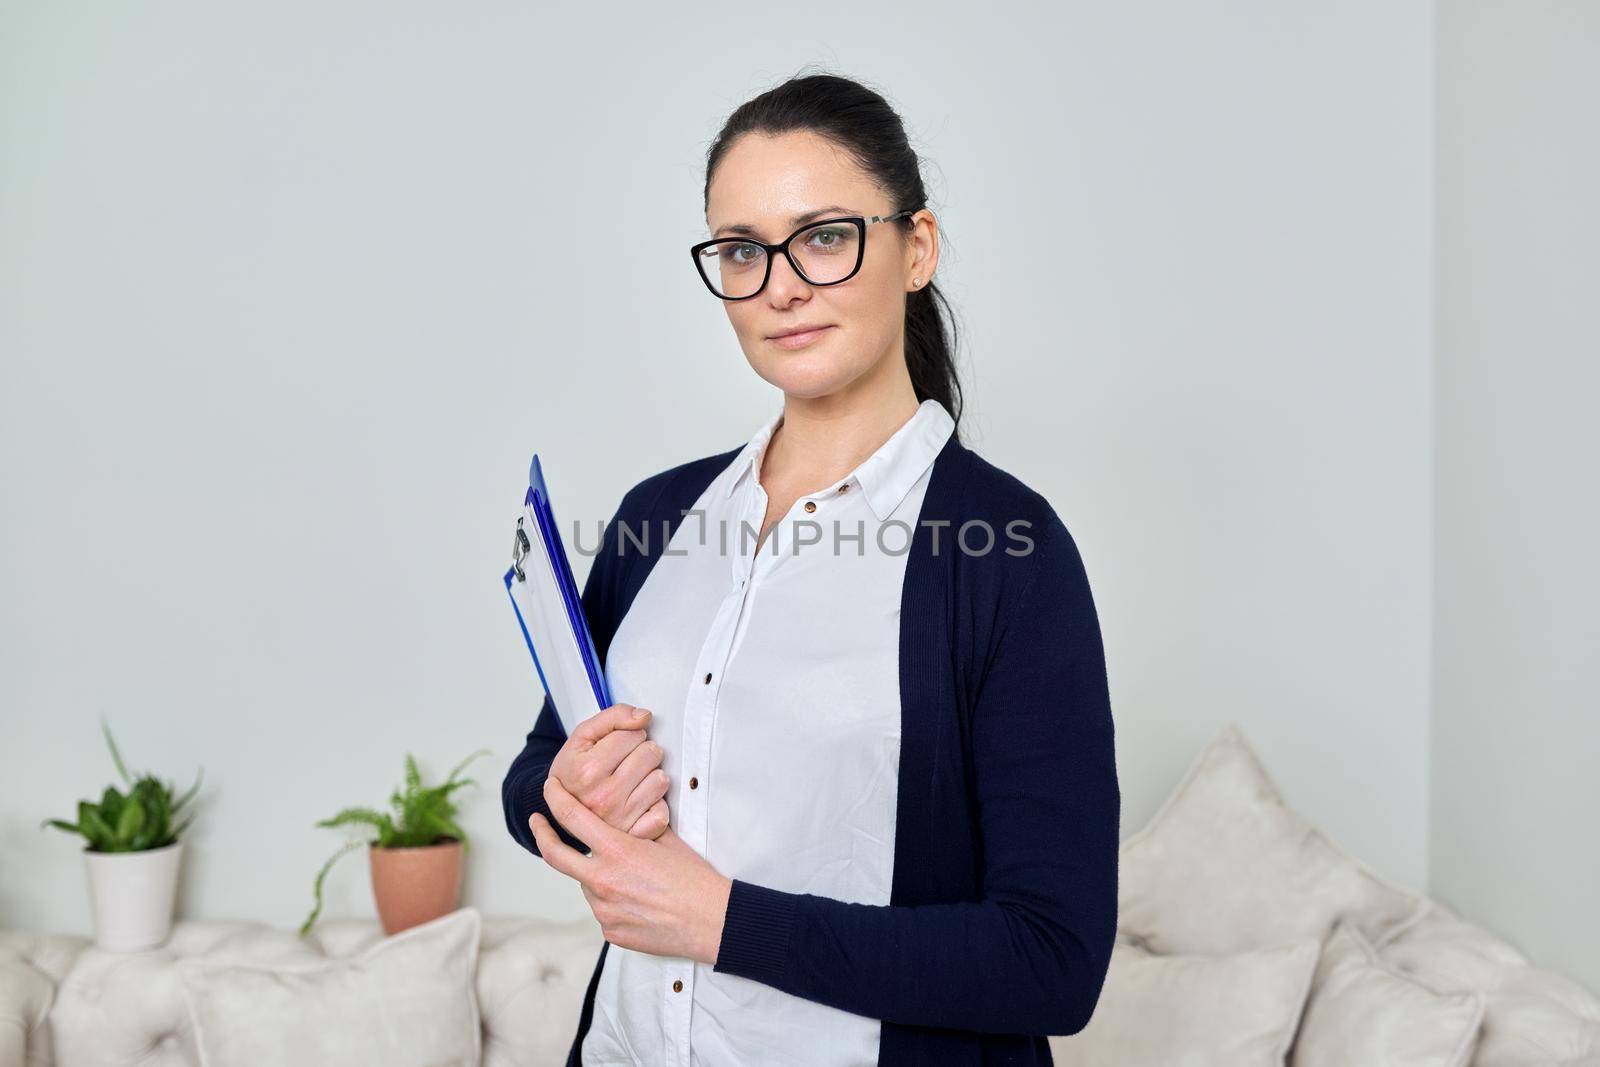 Portrait of smiling successful business woman 40 years old wearing glasses with papers in her hands looking at camera